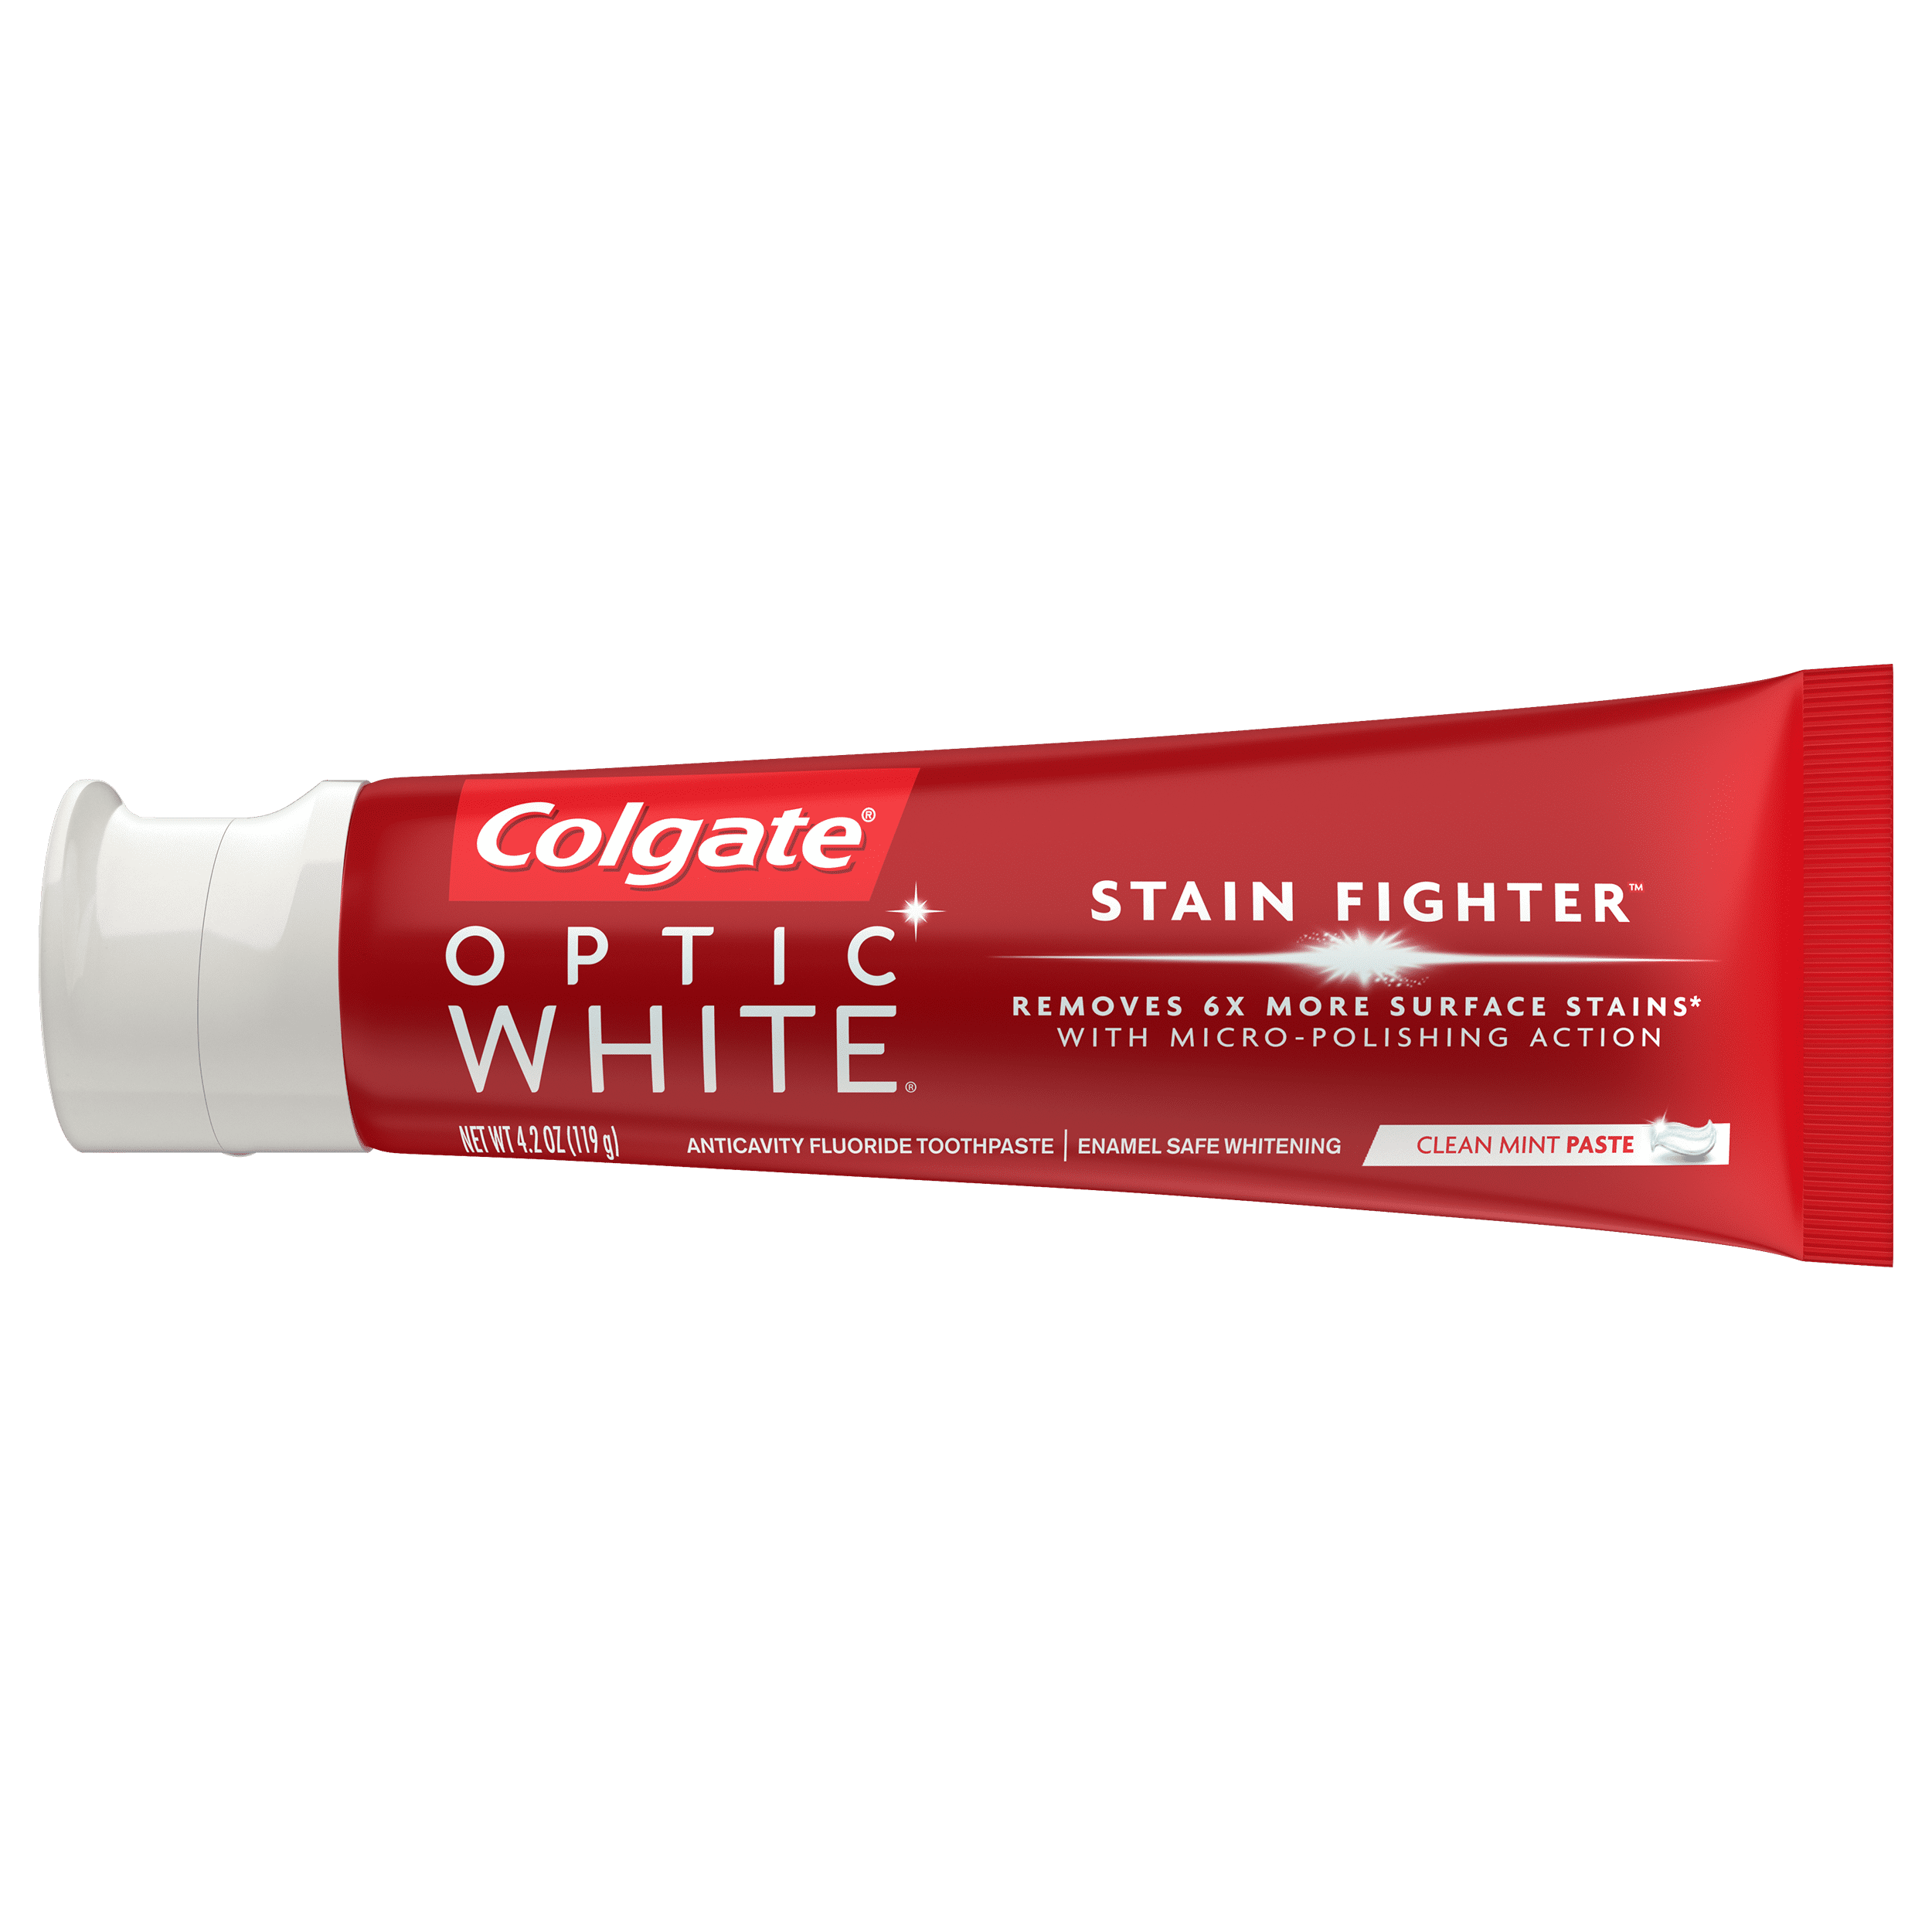 Colgate Optic White Stain Fighter Stain Removal Toothpaste, Clean Mint ...